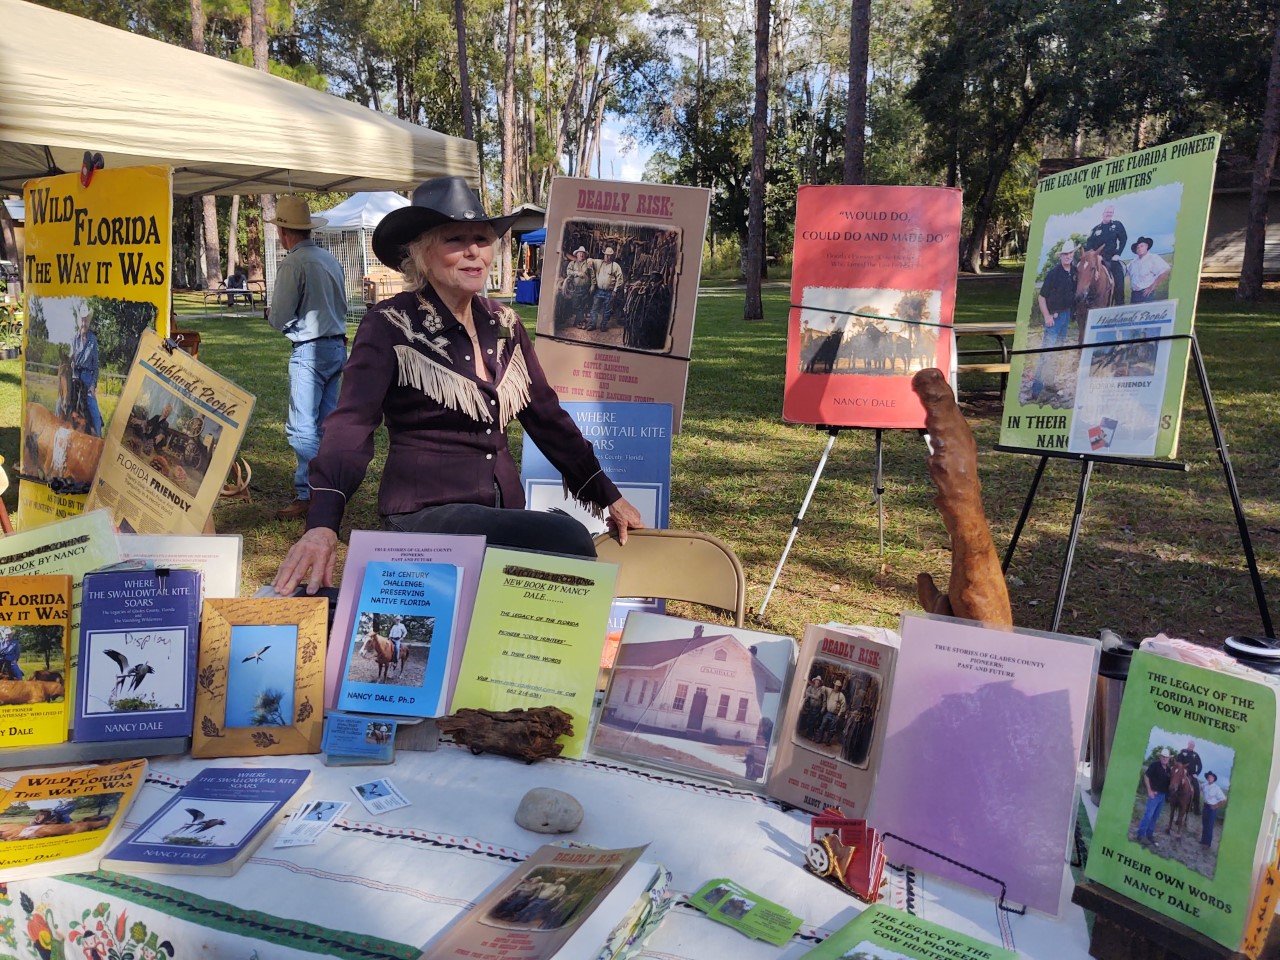 Author Nancy Dale, Ph.D. with Florida Cow Hunter History Books. [Courtesy photo]